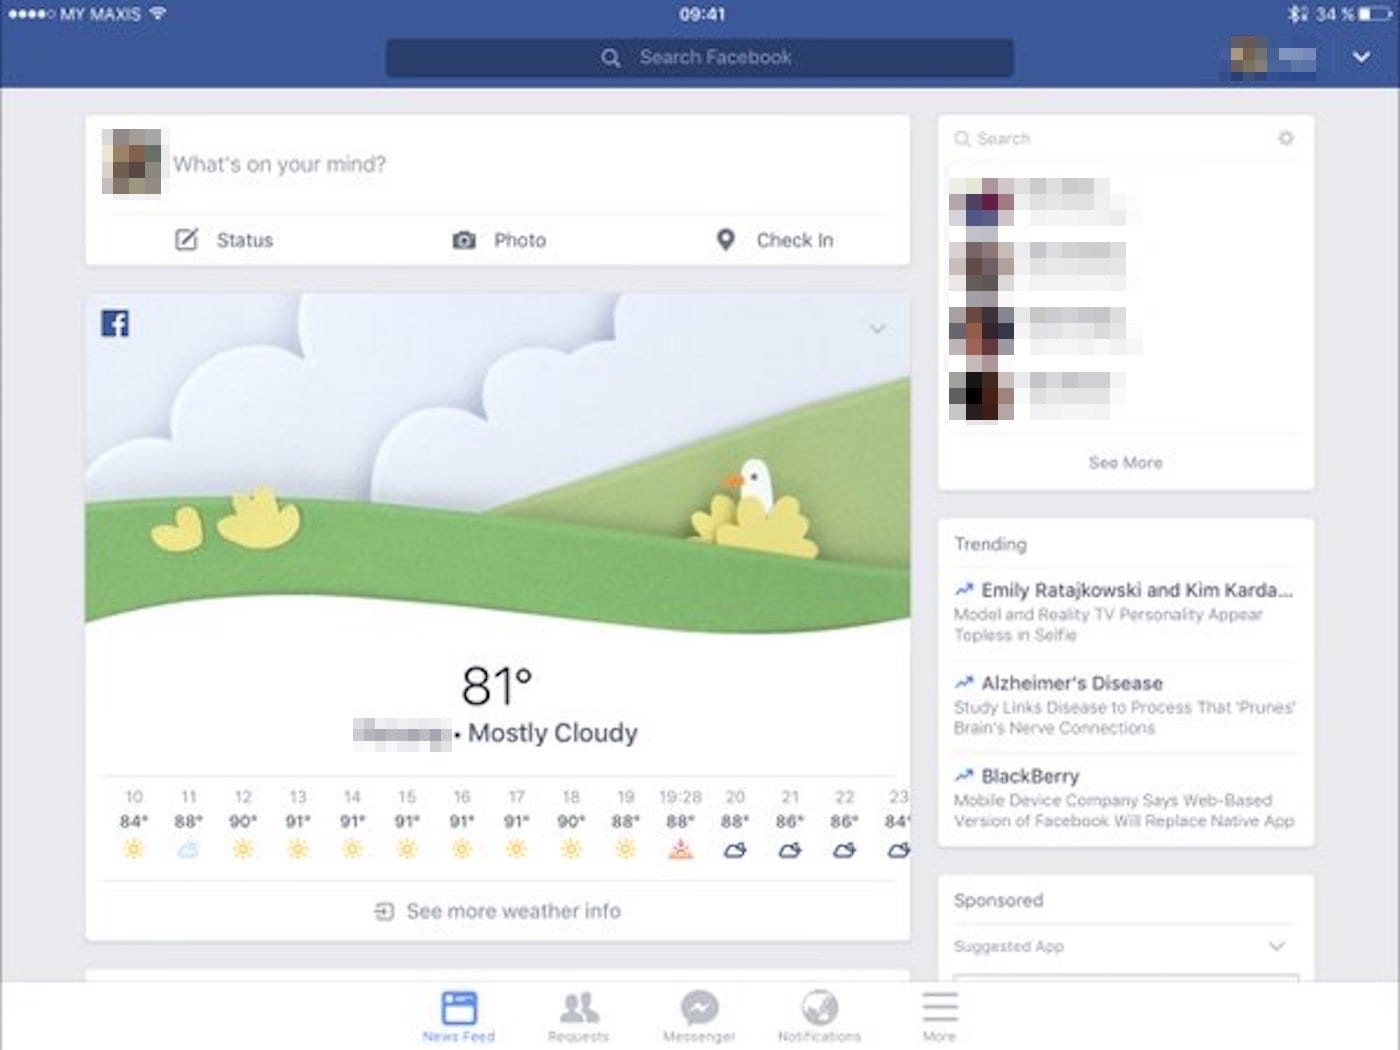 Facebook's weather forecast feature